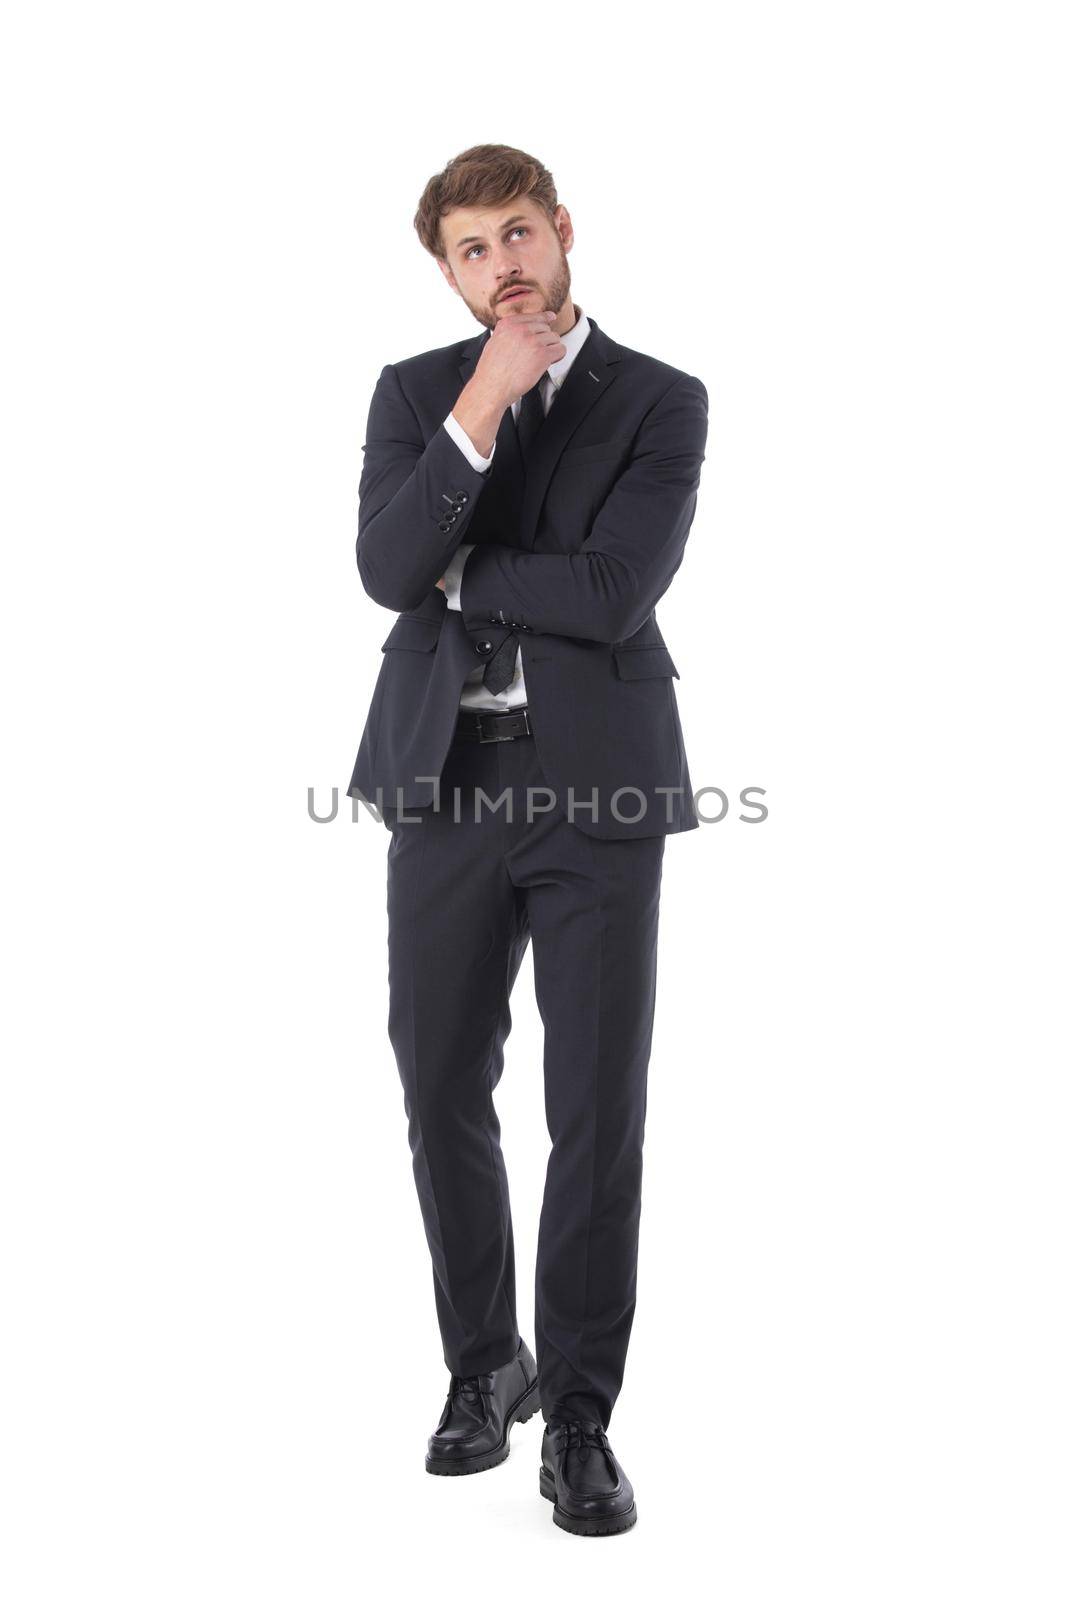 Thoughtful businessman holding chin by ALotOfPeople